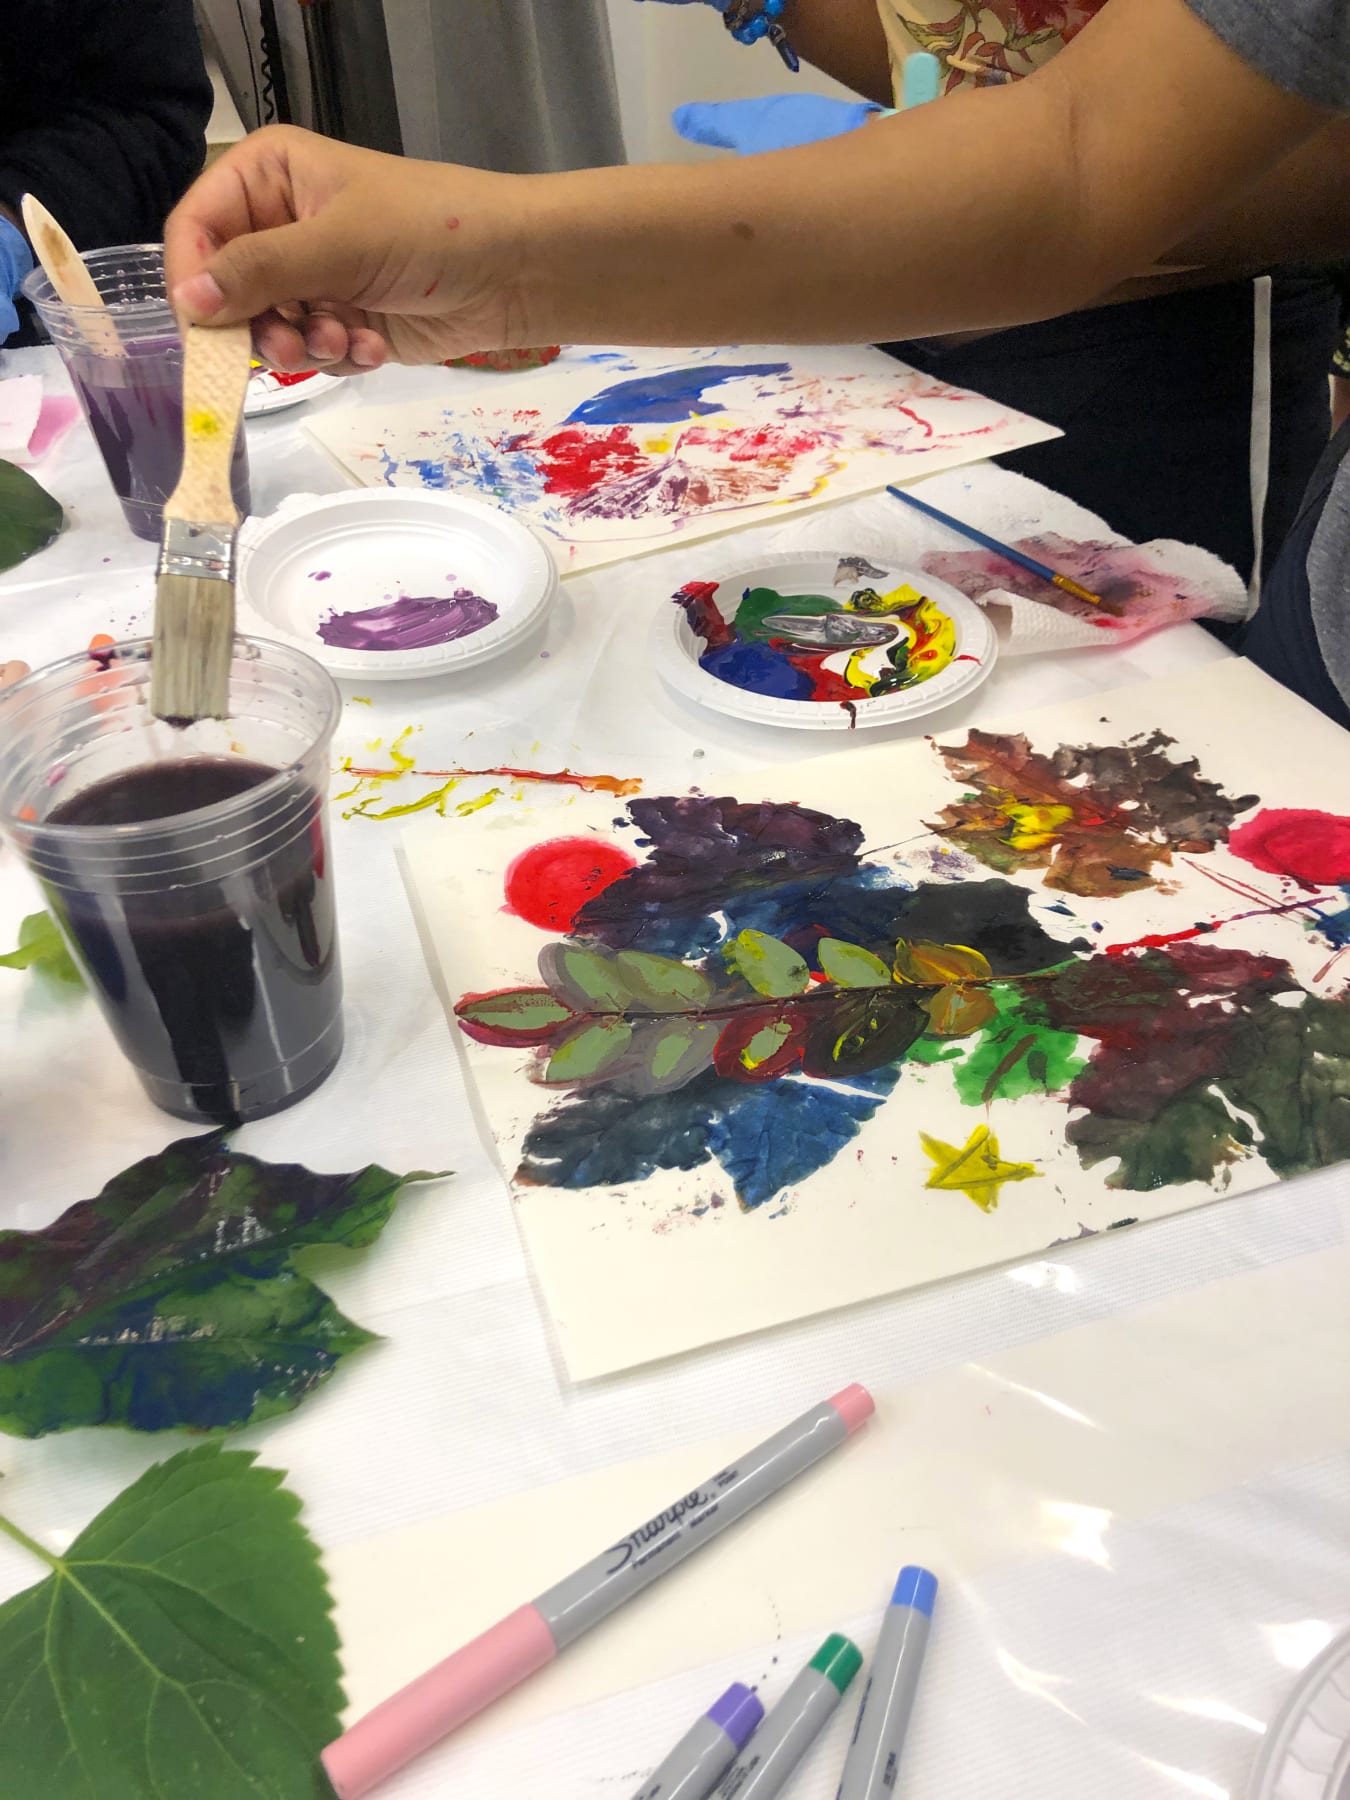 A student holding a paintbrush creates a colorful painting with leaves